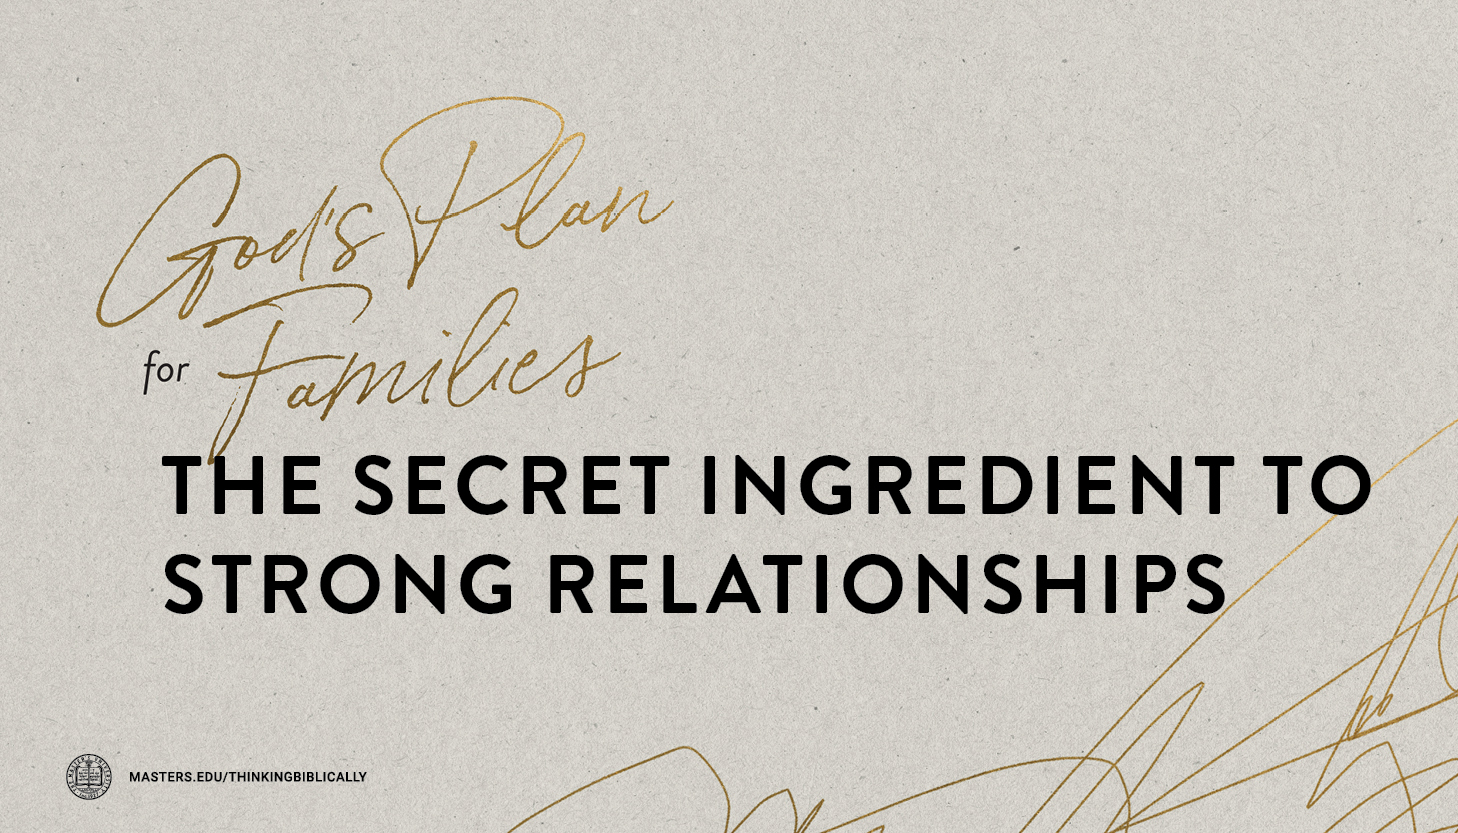 The Secret Ingredient to Strong Relationships